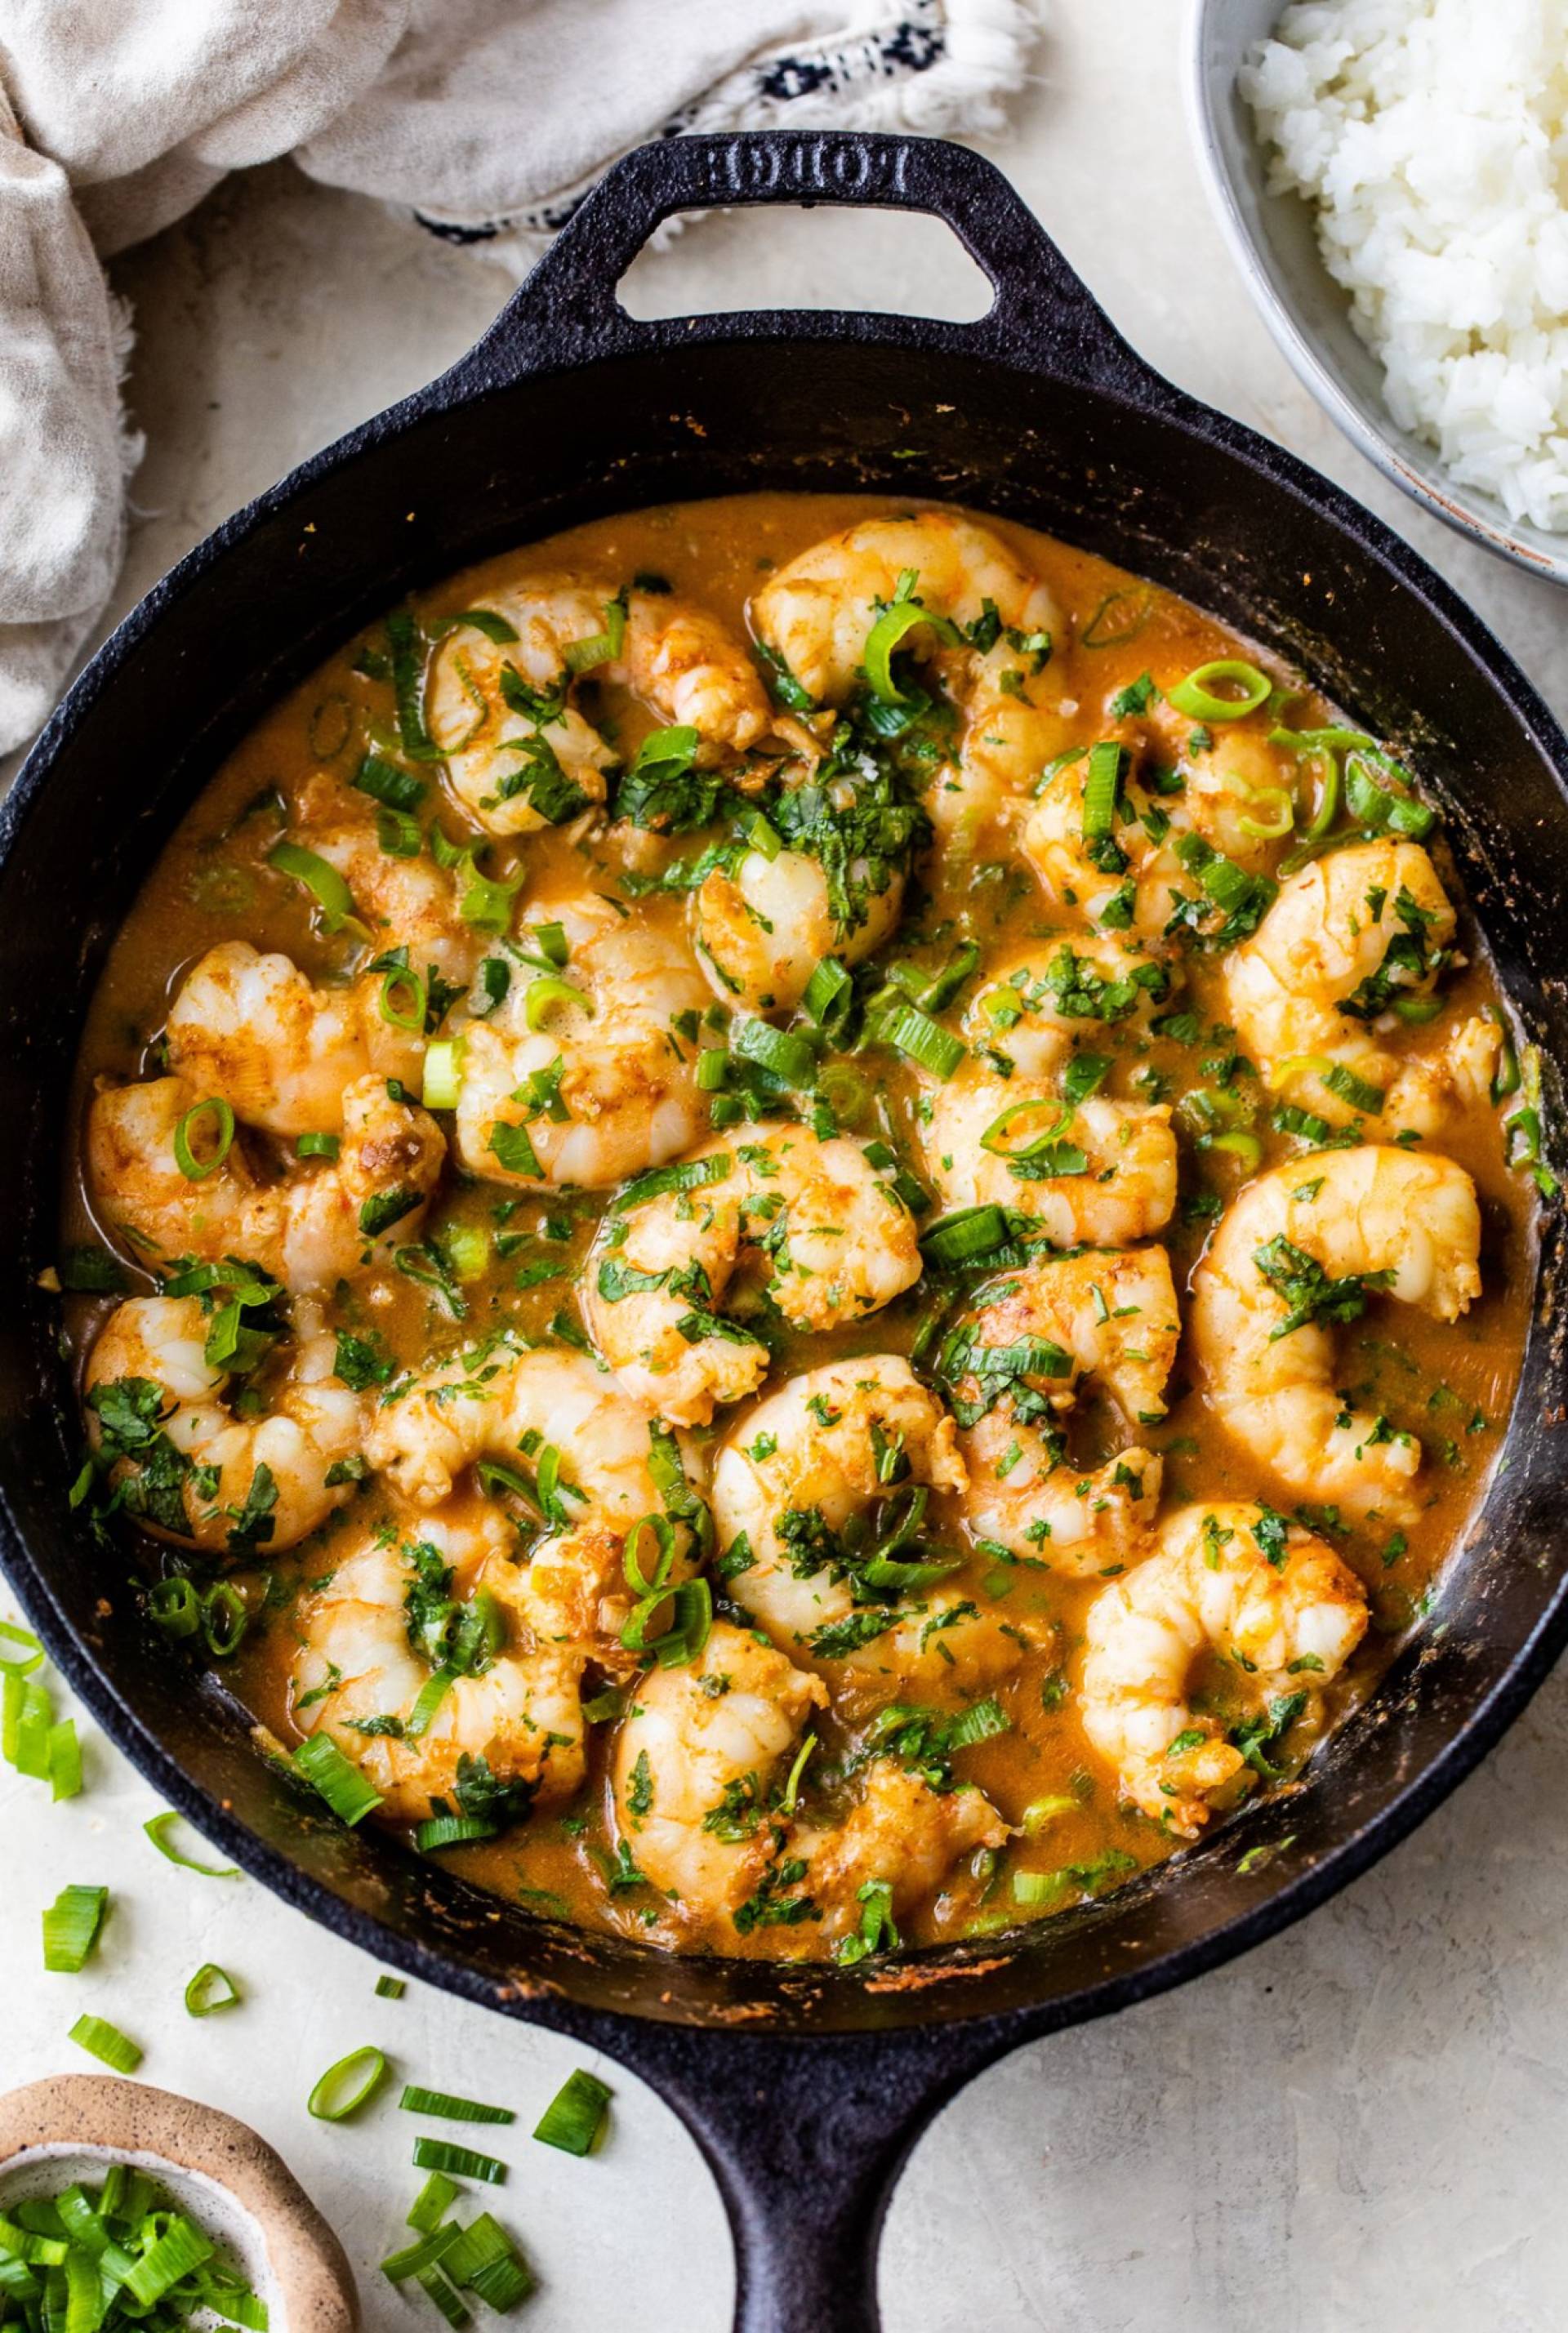 Red Thai Coconut Curry Shrimp with white rice